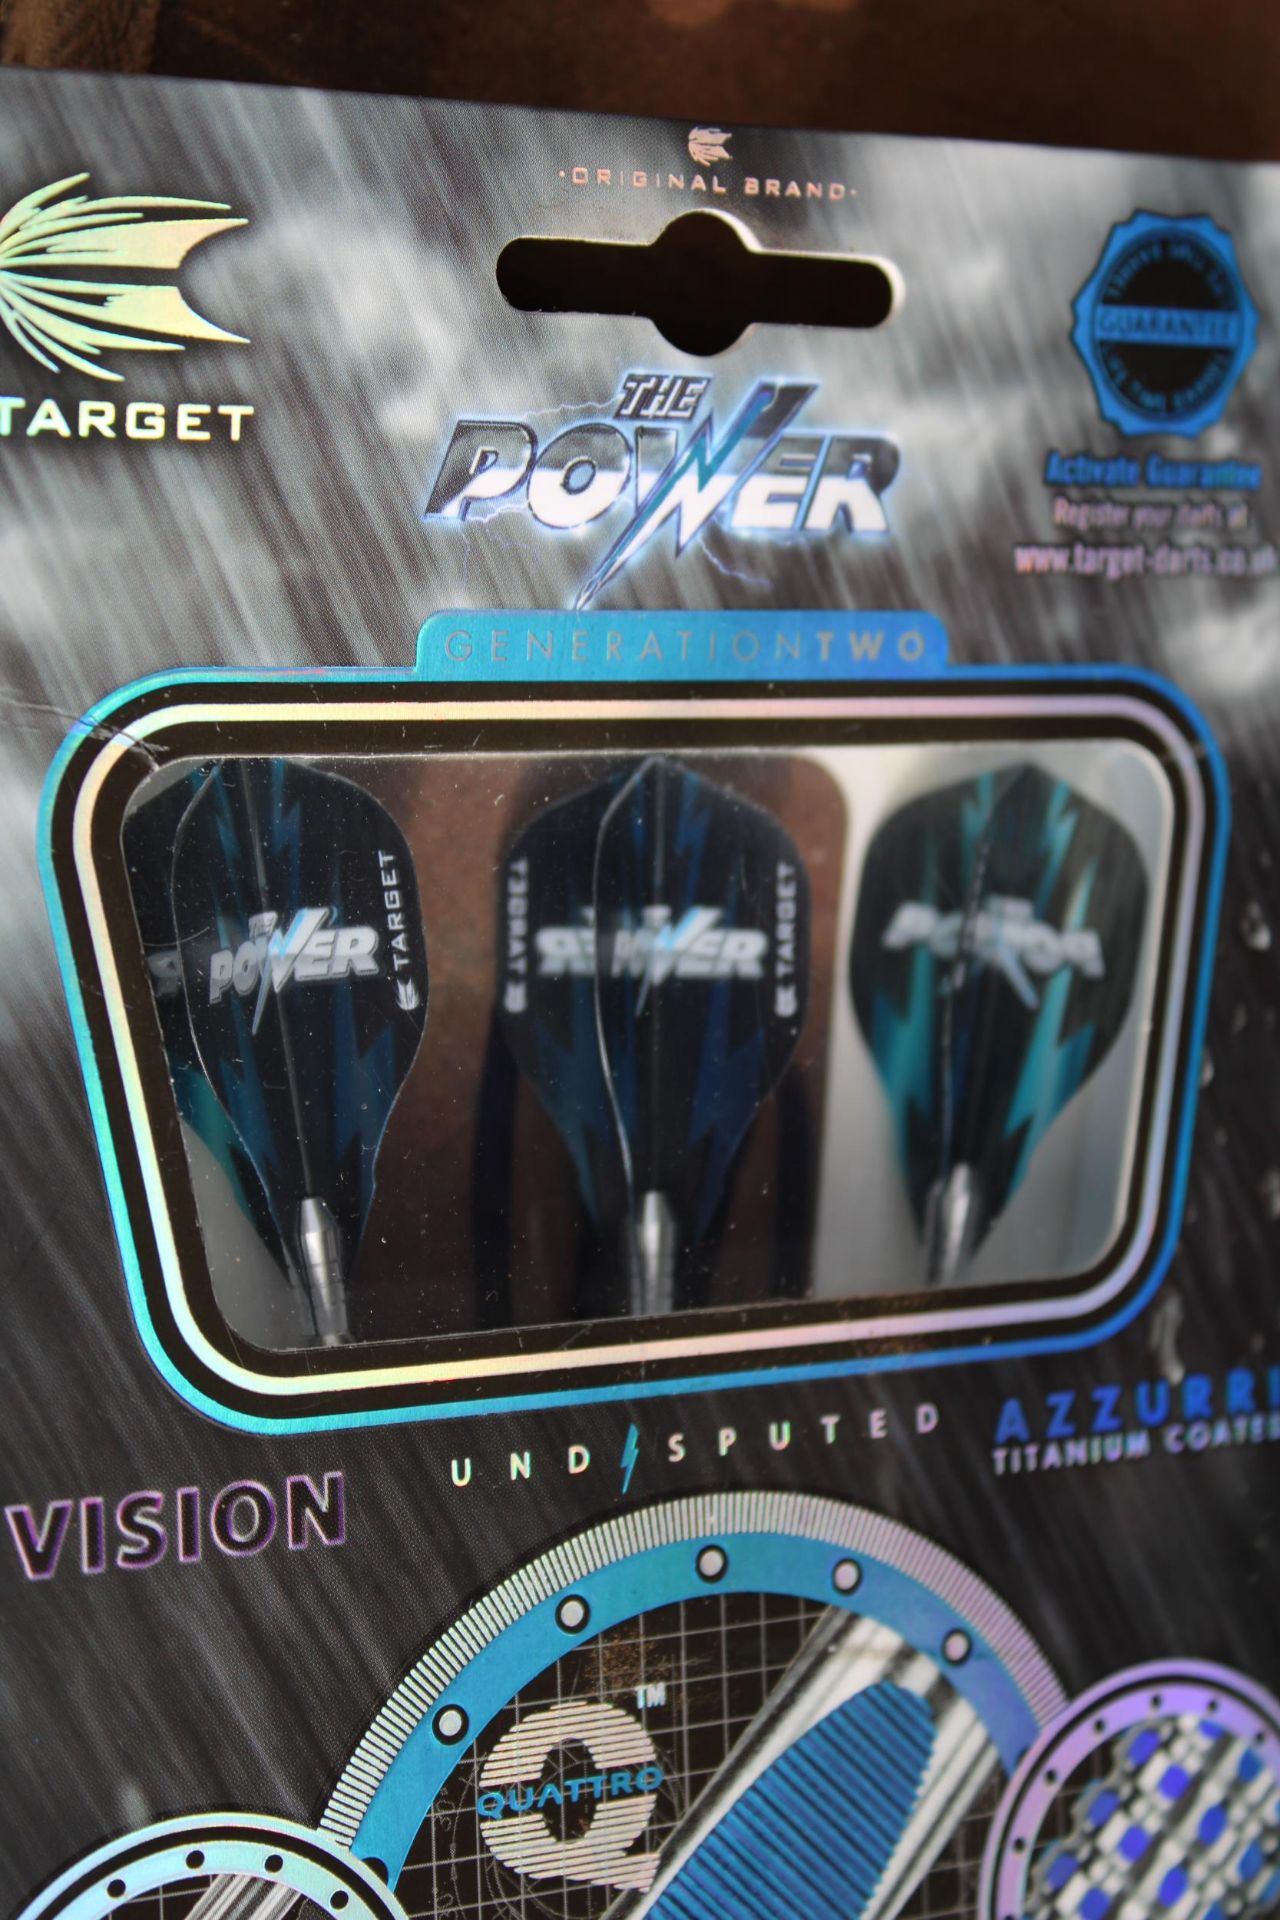 A SET OF BRAND NEW AND BOXED PHIL TAYLOR POWER-9FIVE GENERATION TWO POWER SHAFT 26G 95% TUNGSTEN - Image 4 of 4